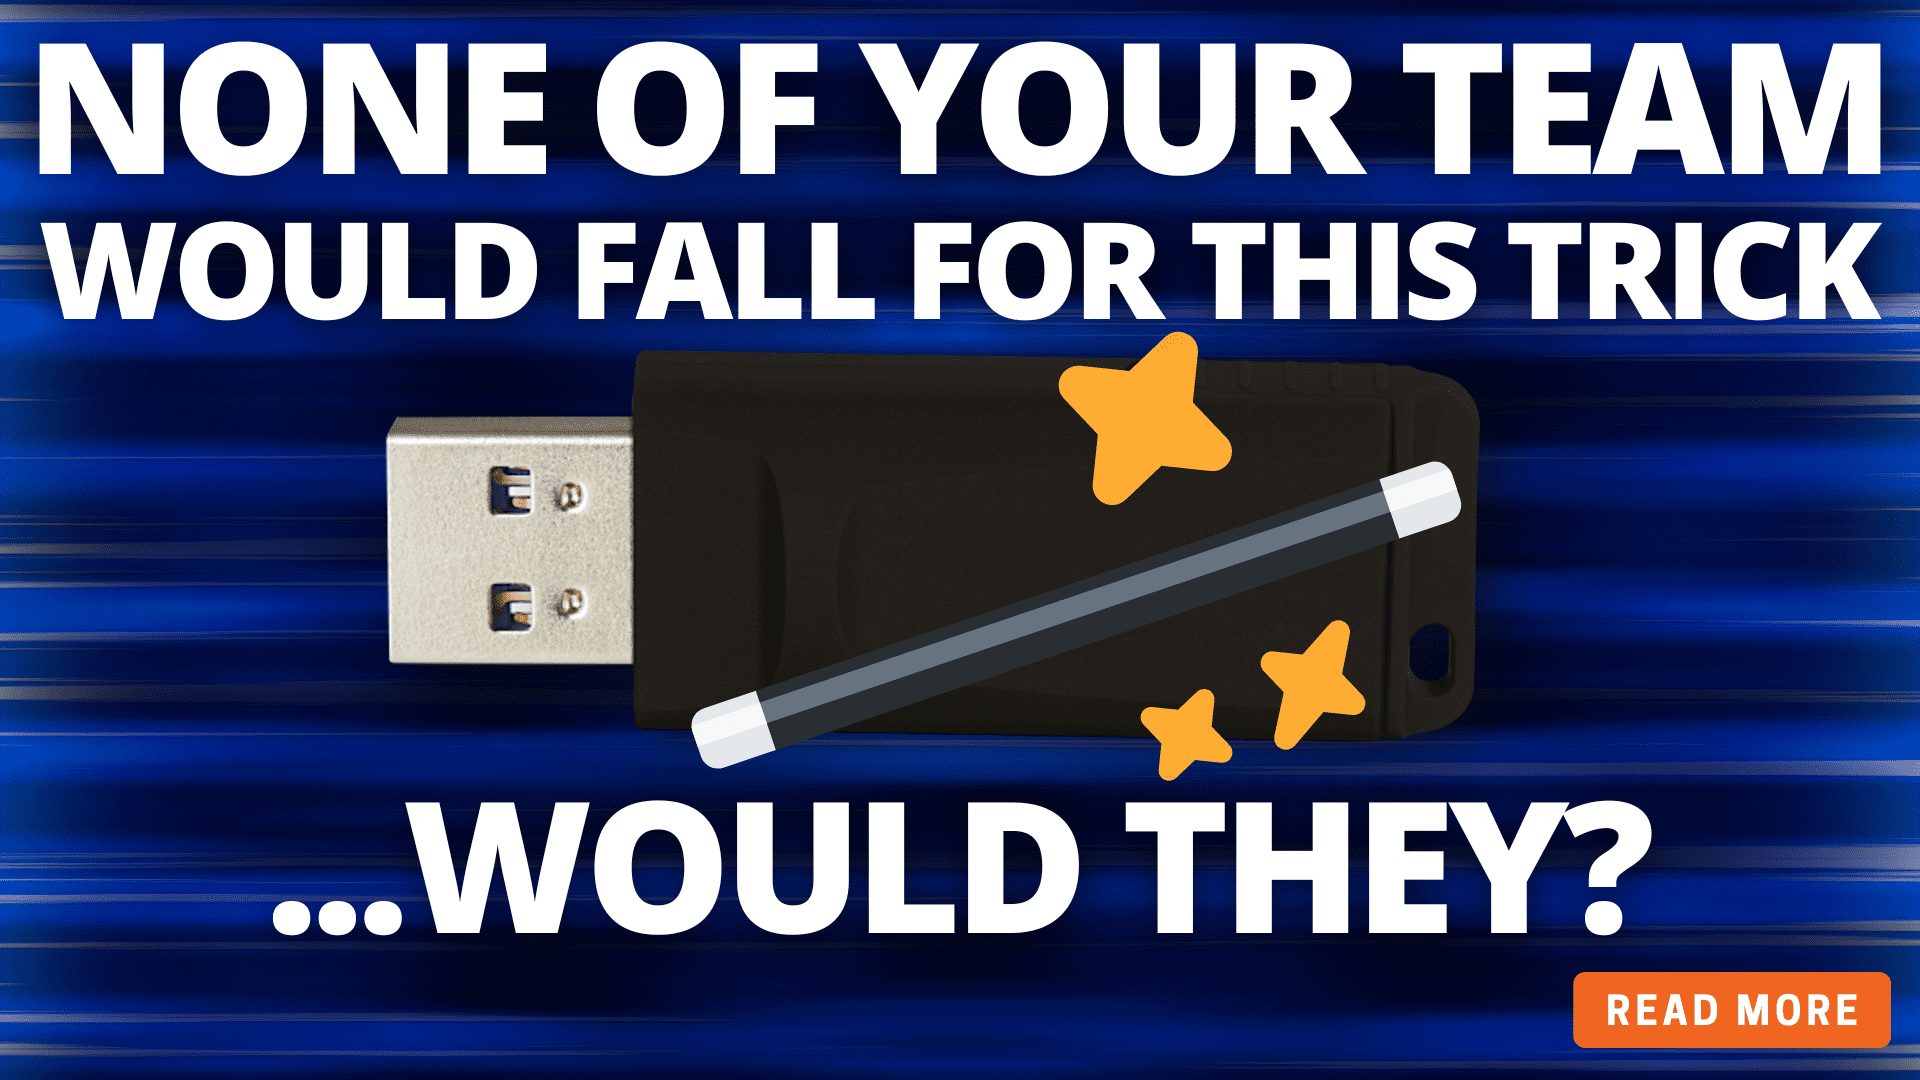 None of your team would fall for this trick… would they?